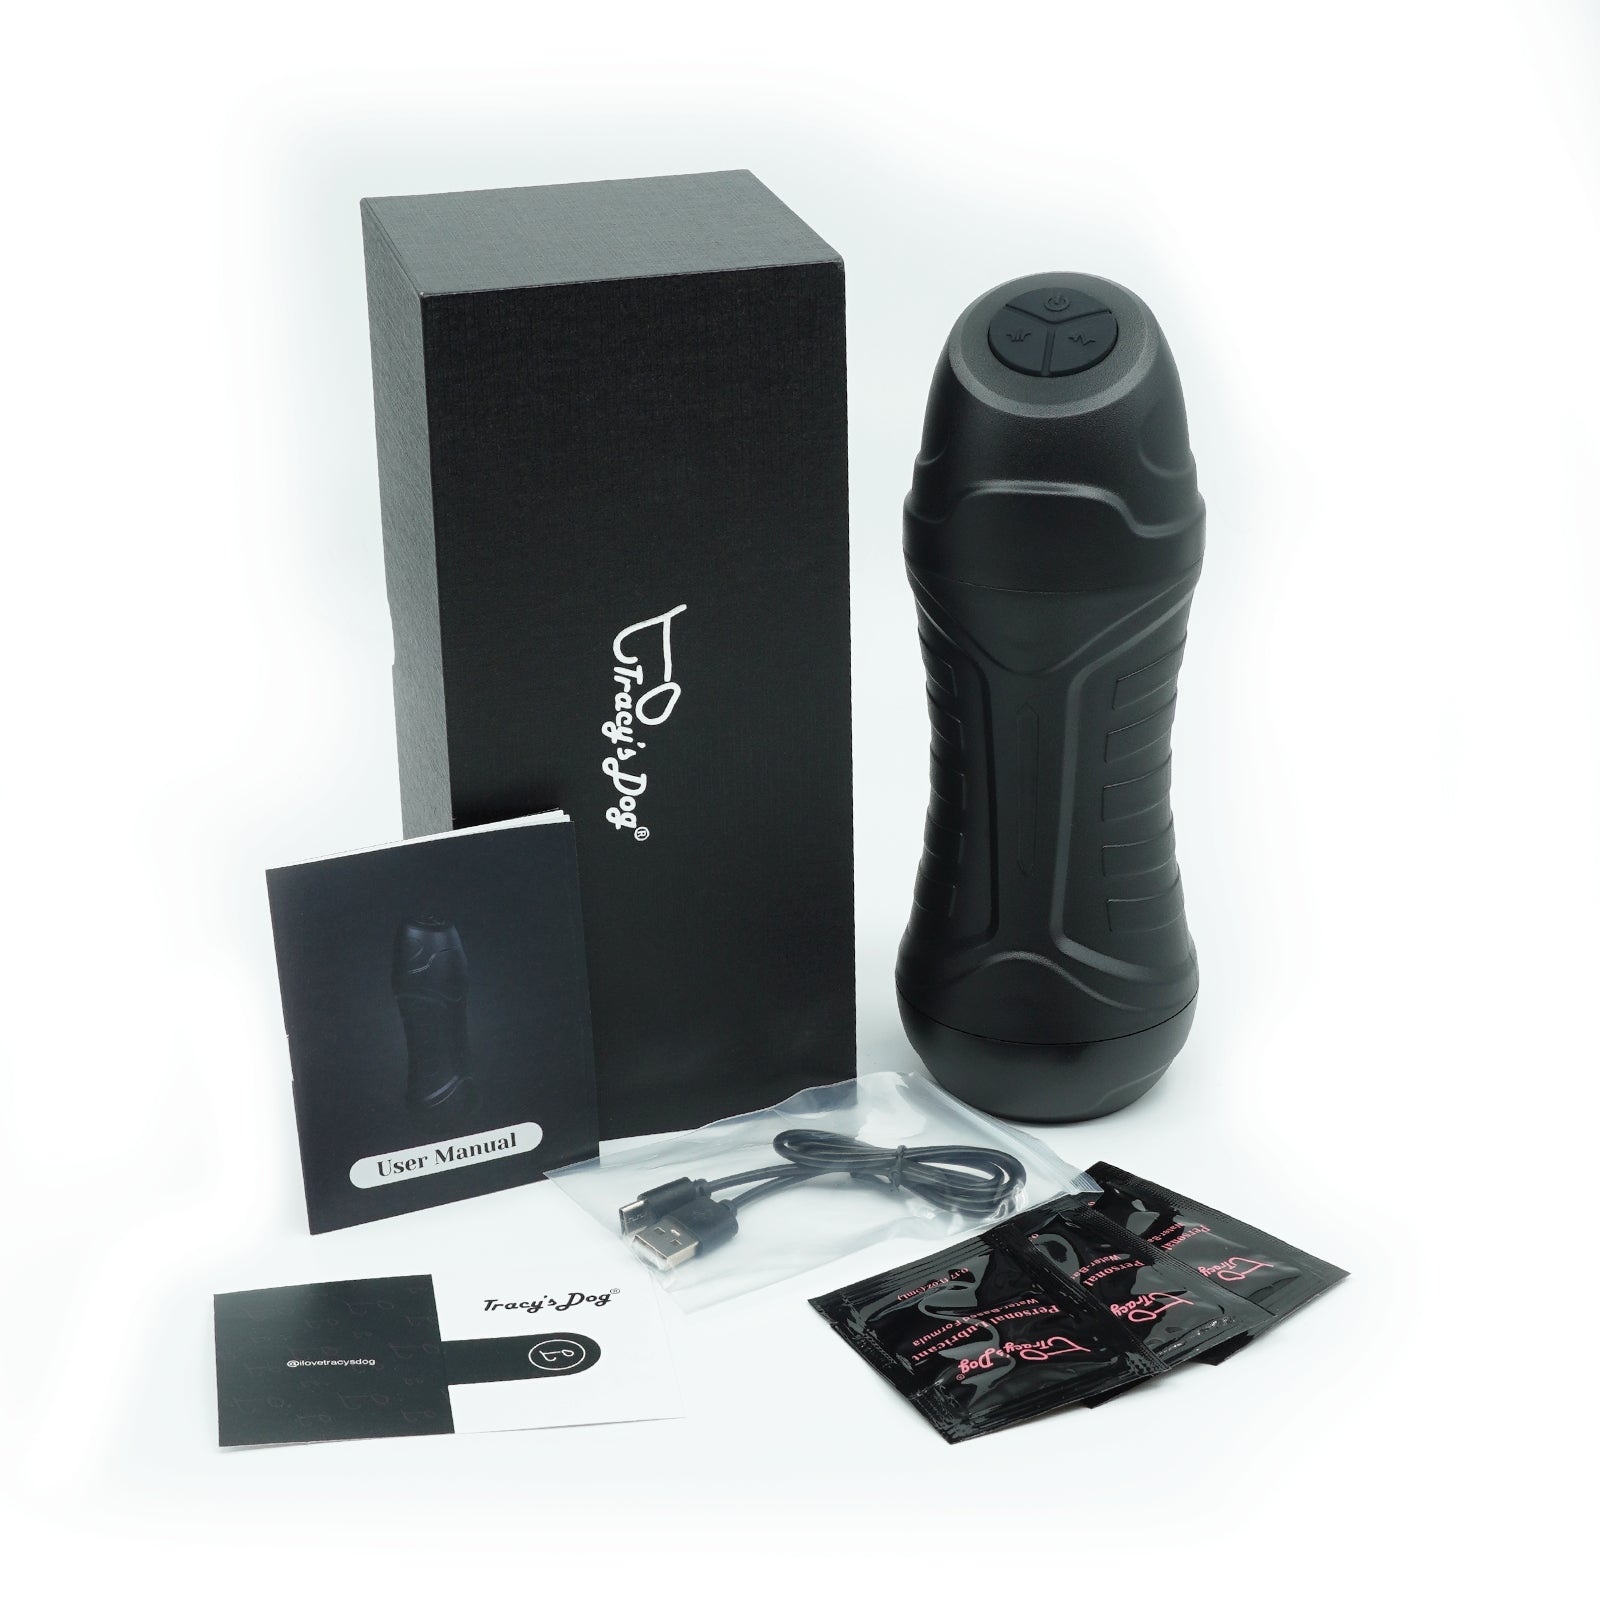 Osburn Automatic Male Masturbator, color: black, 6 vibration and suction modes, Quik to assemble, USB charging